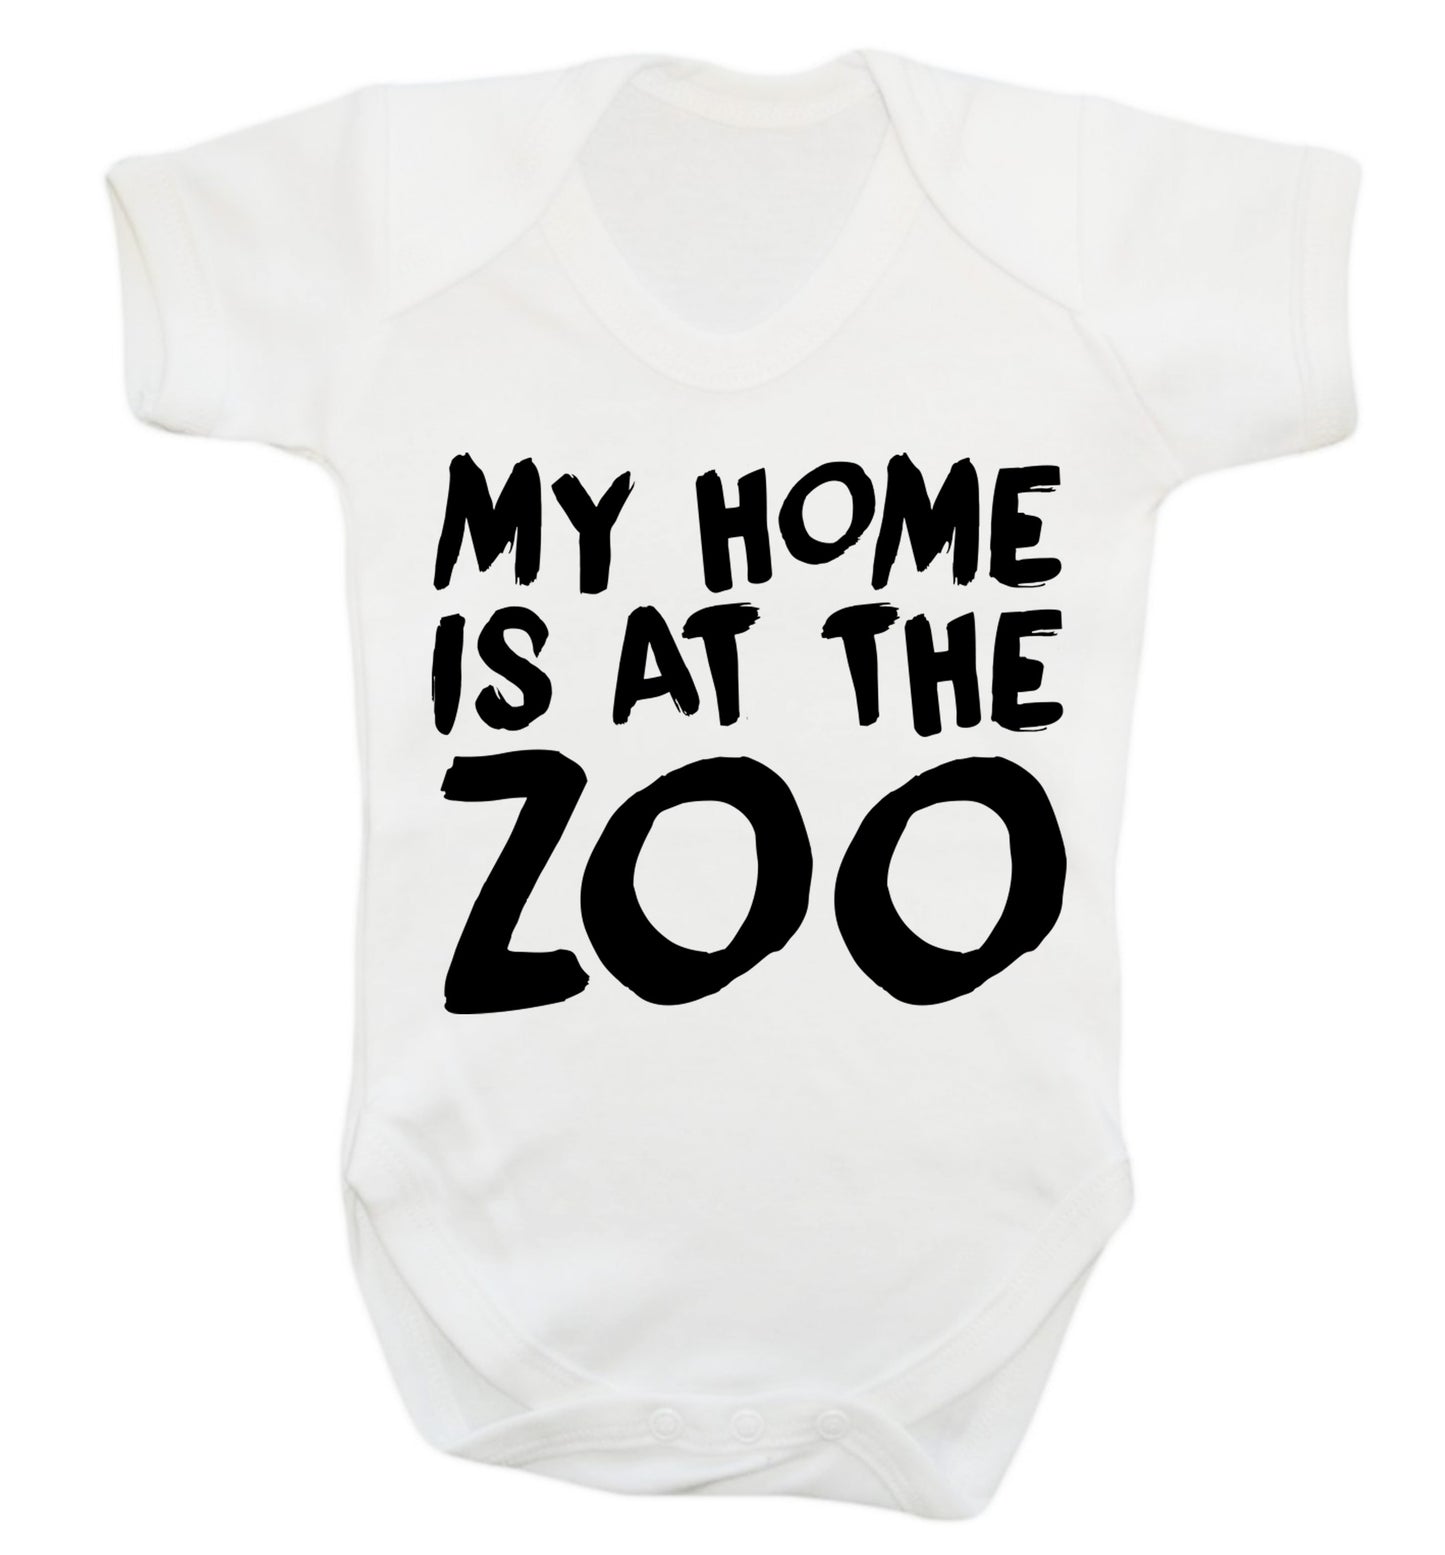 My home is at the zoo Baby Vest white 18-24 months